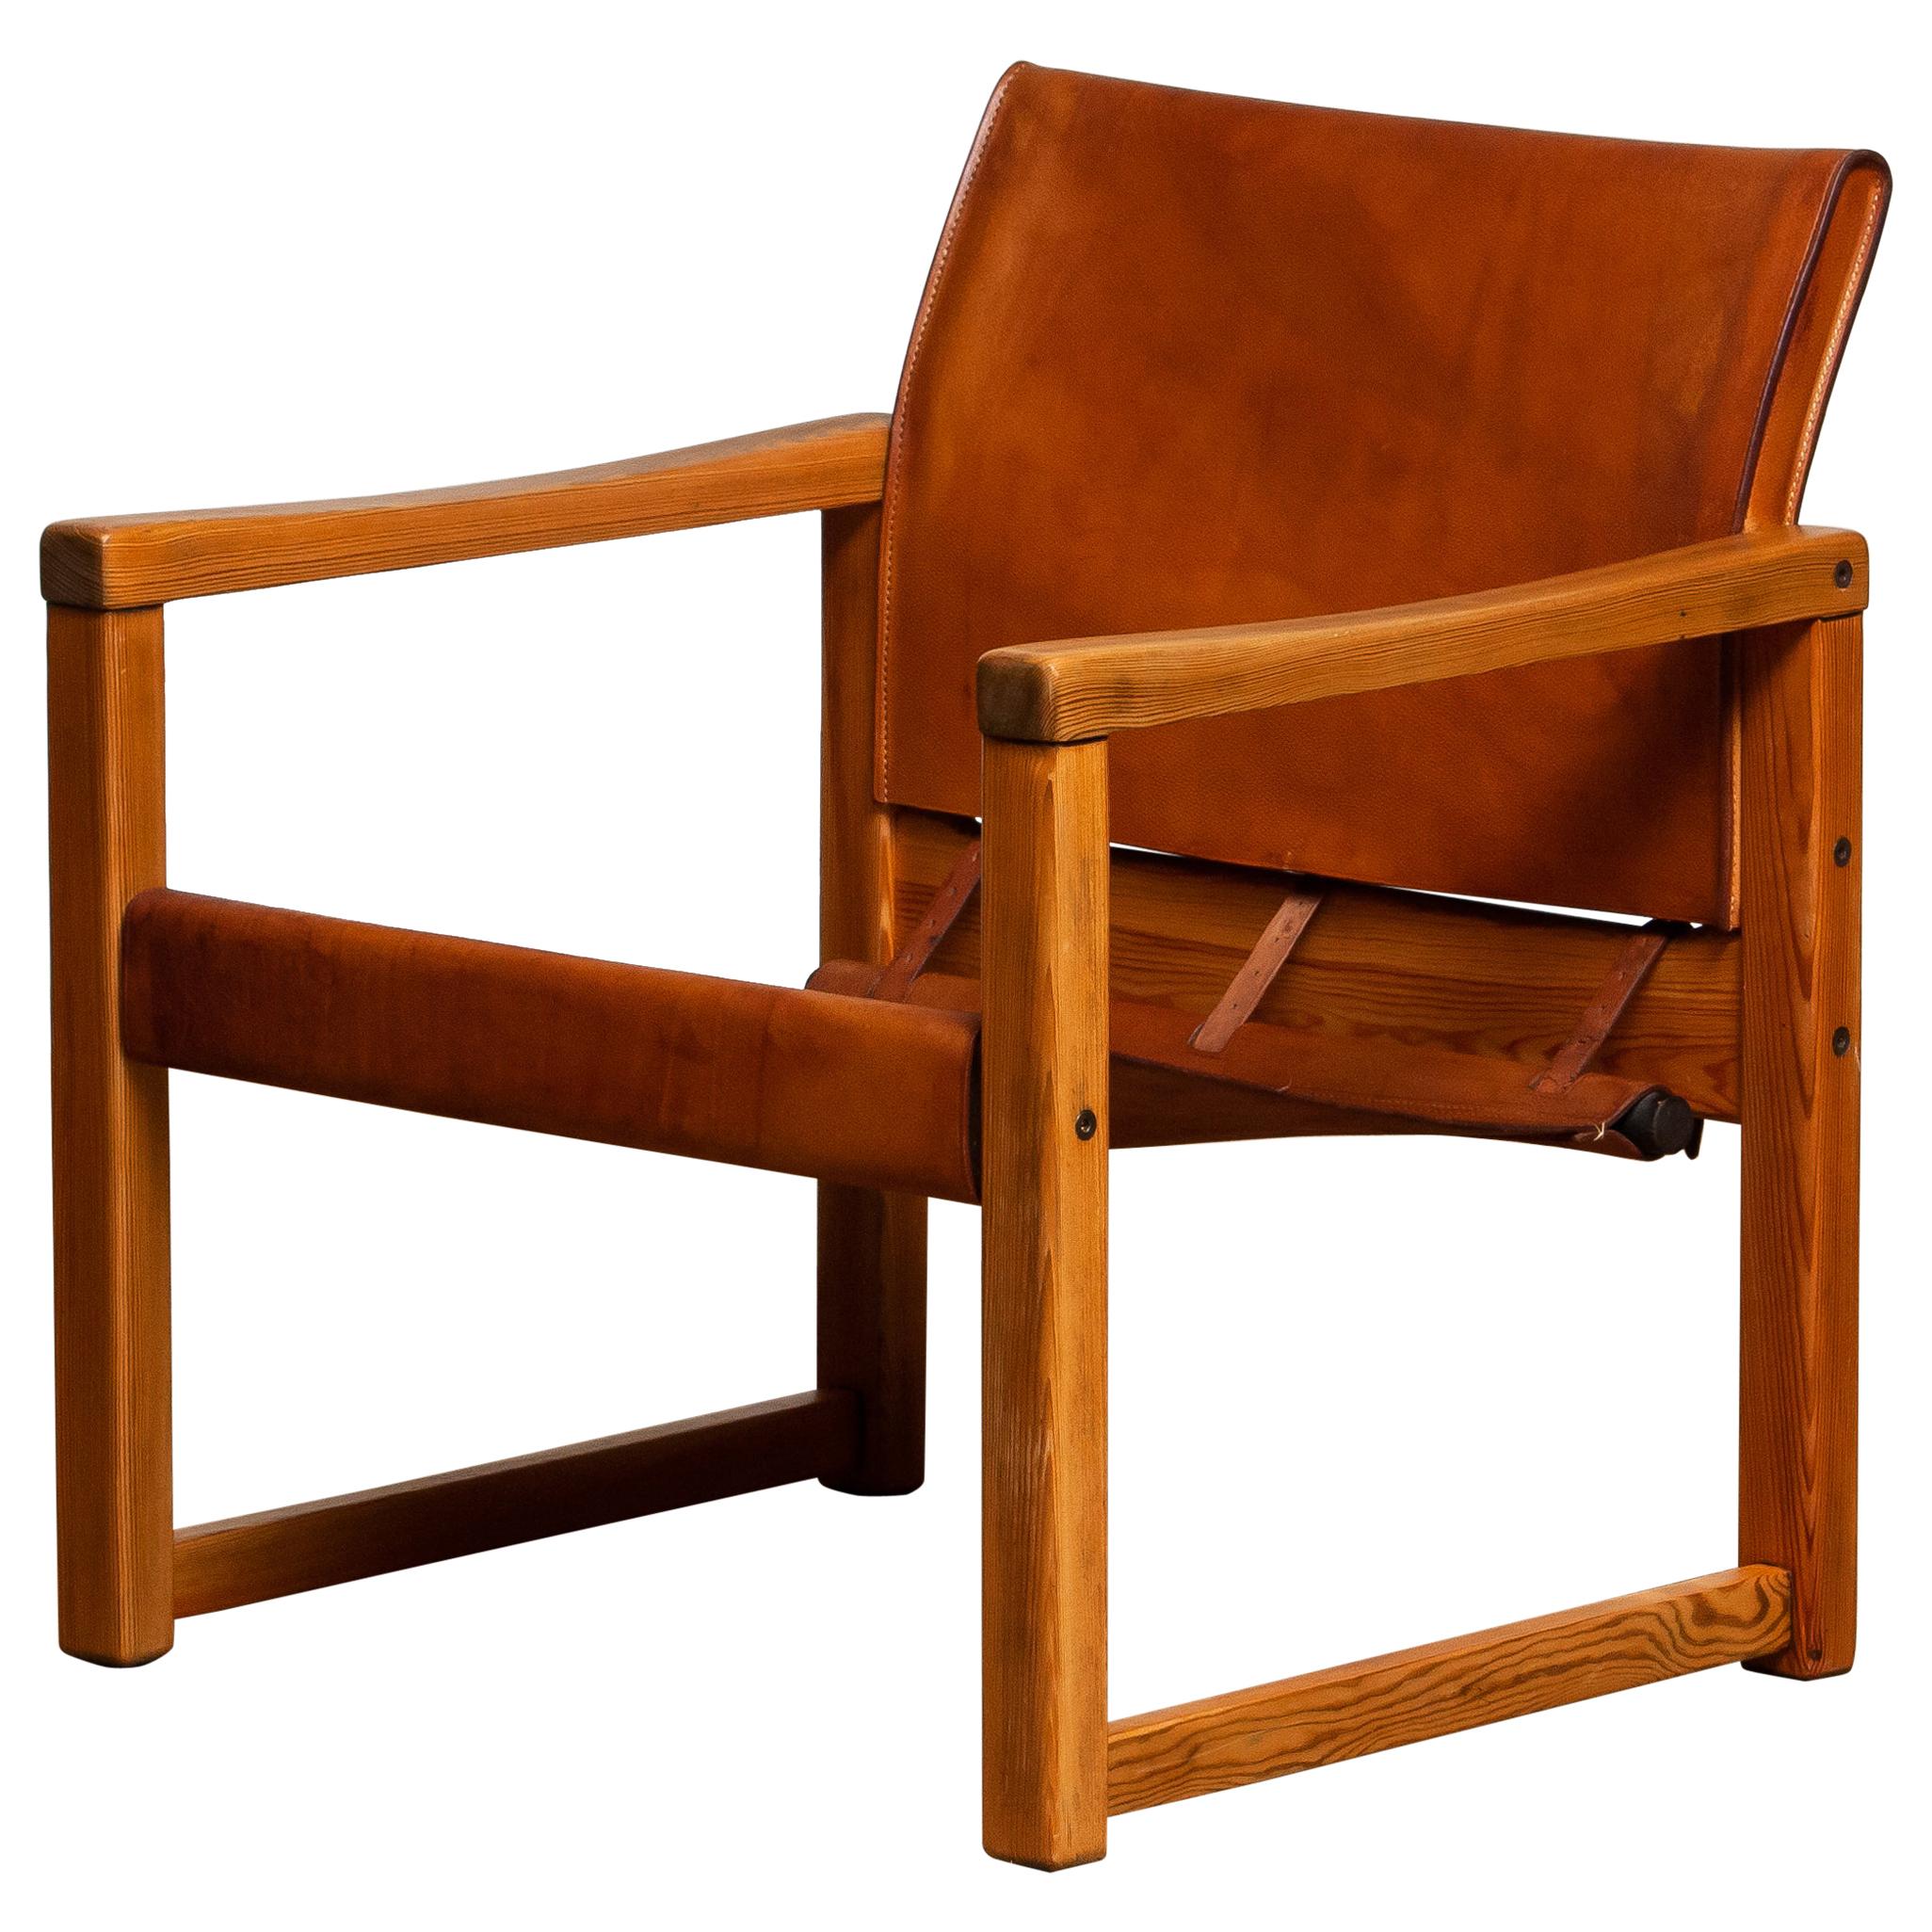 Beautiful leather safari chair (Model Diana) designed by Karin Mobring for Ikea, Sweden. The model is lounged in 1974.
The study cognac leather is in good and smooth condition and also has a beautiful patina true the years. Overall condition of the